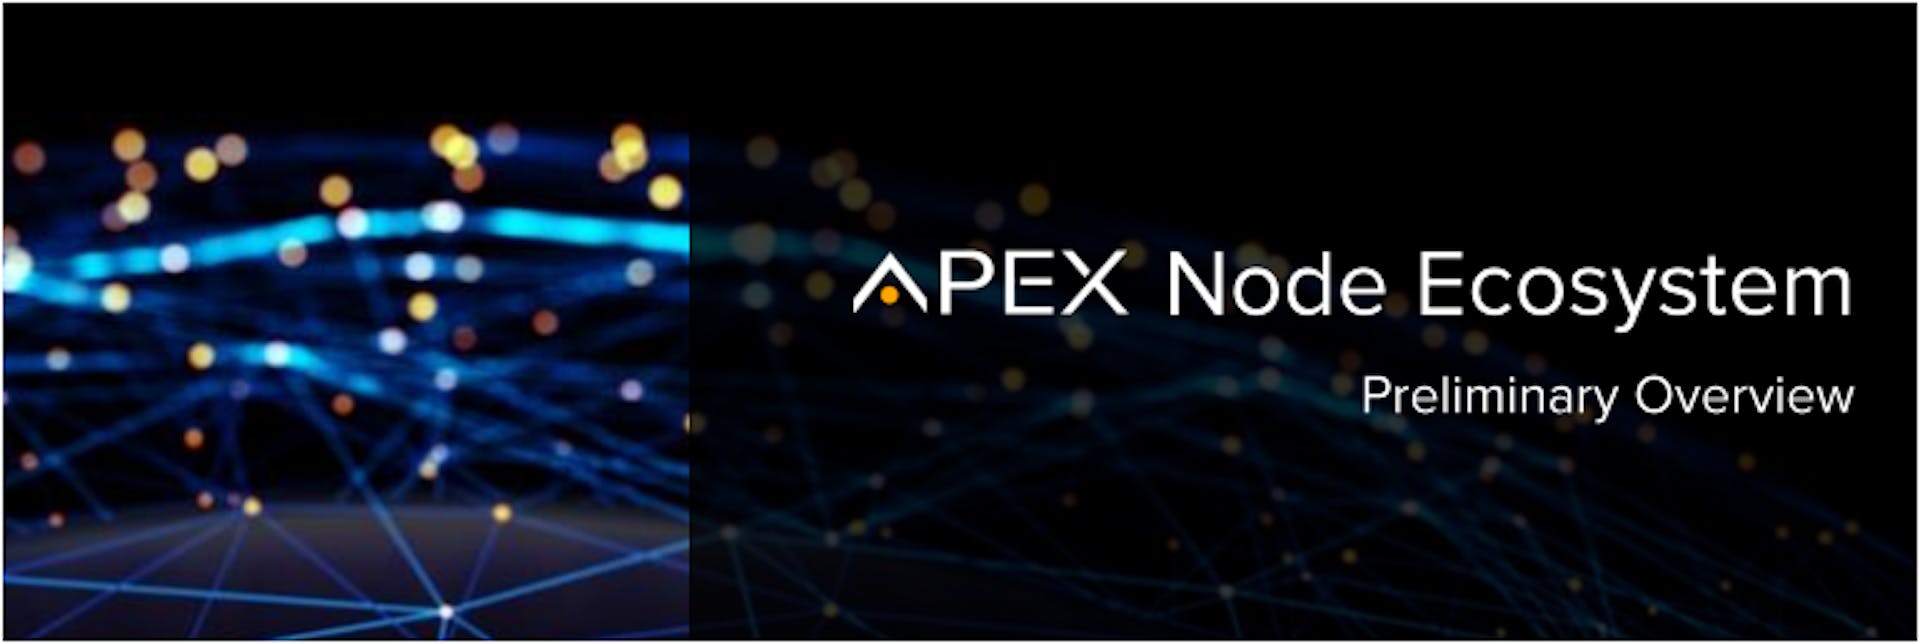 featured image - The Apex Node Ecosystem explained: Supernodes, Voternodes and Data Cloud Nodes